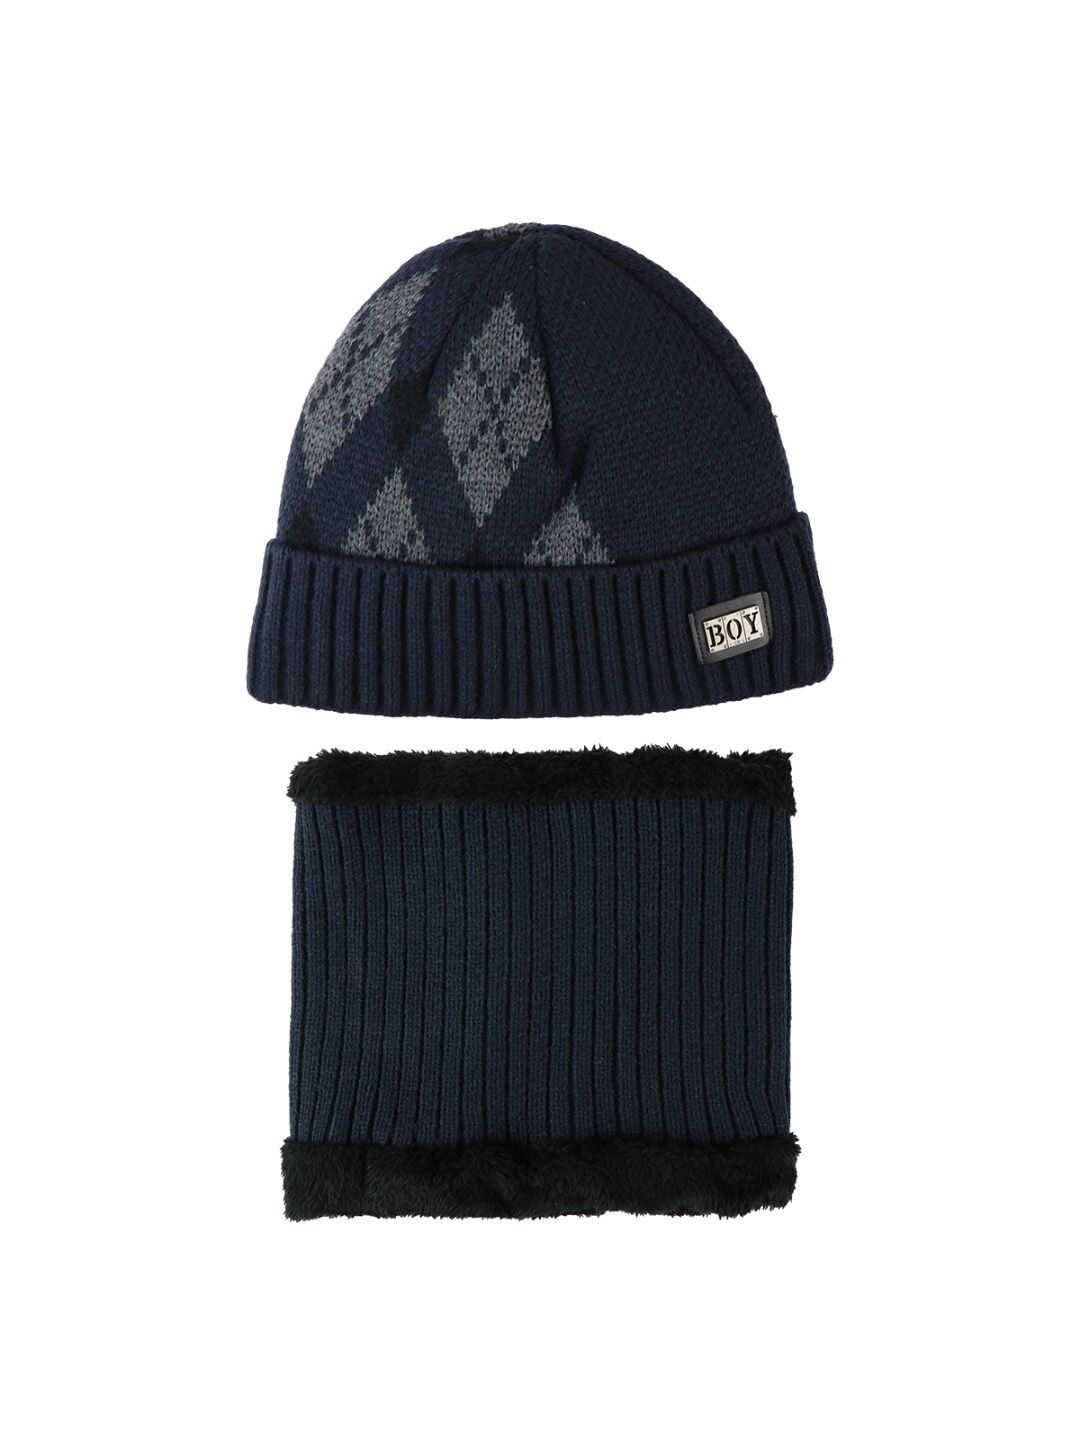 iSWEVEN Unisex Navy Blue Woolen Beanie  with Neck Warmer Scarf Price in India